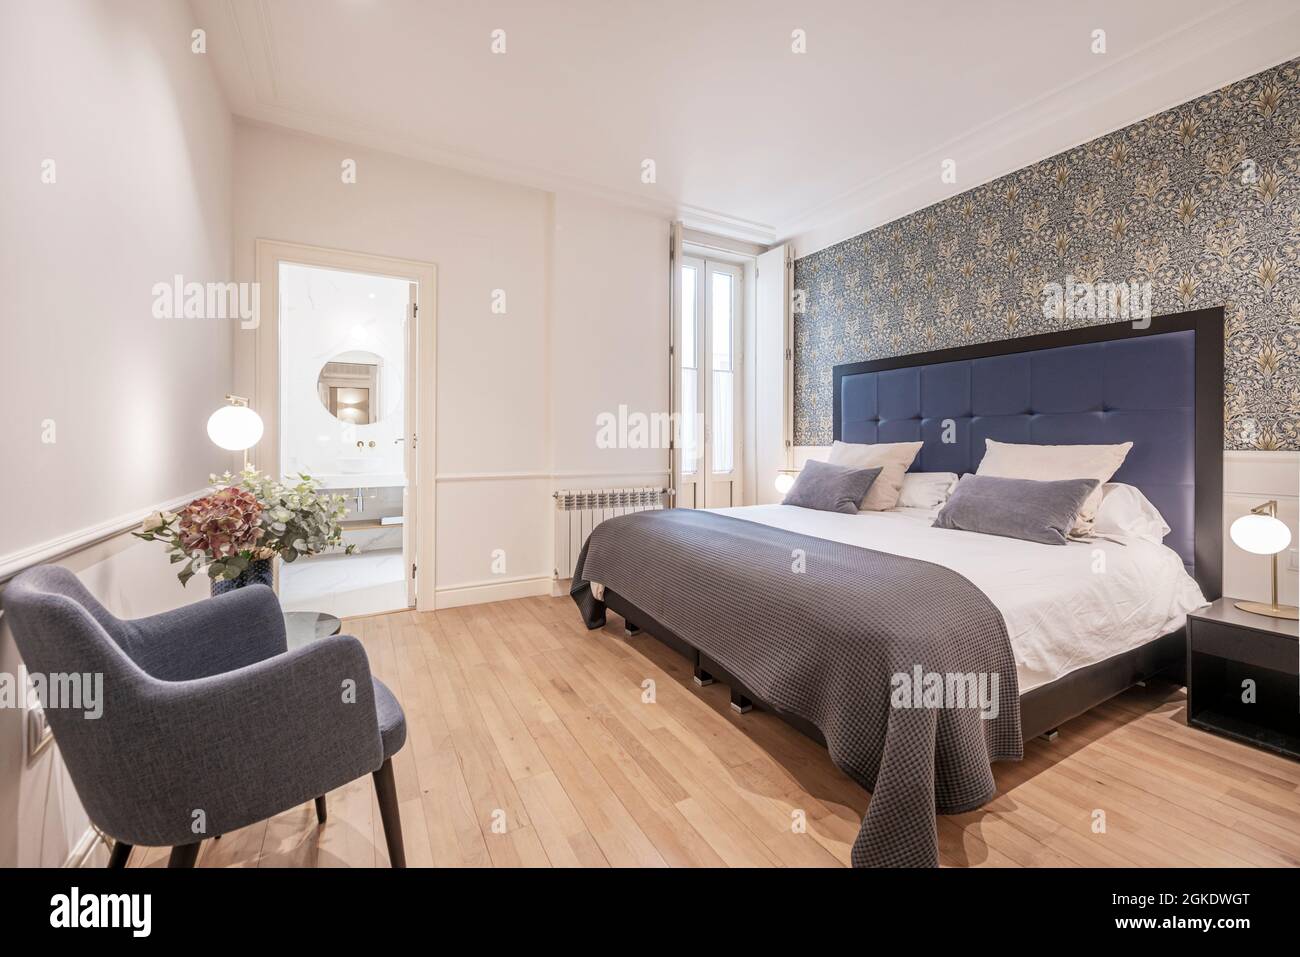 Bedroom in a vacation rental home with a king size bed, a barefoot chair and an en-suite toilet with oak flooring Stock Photo